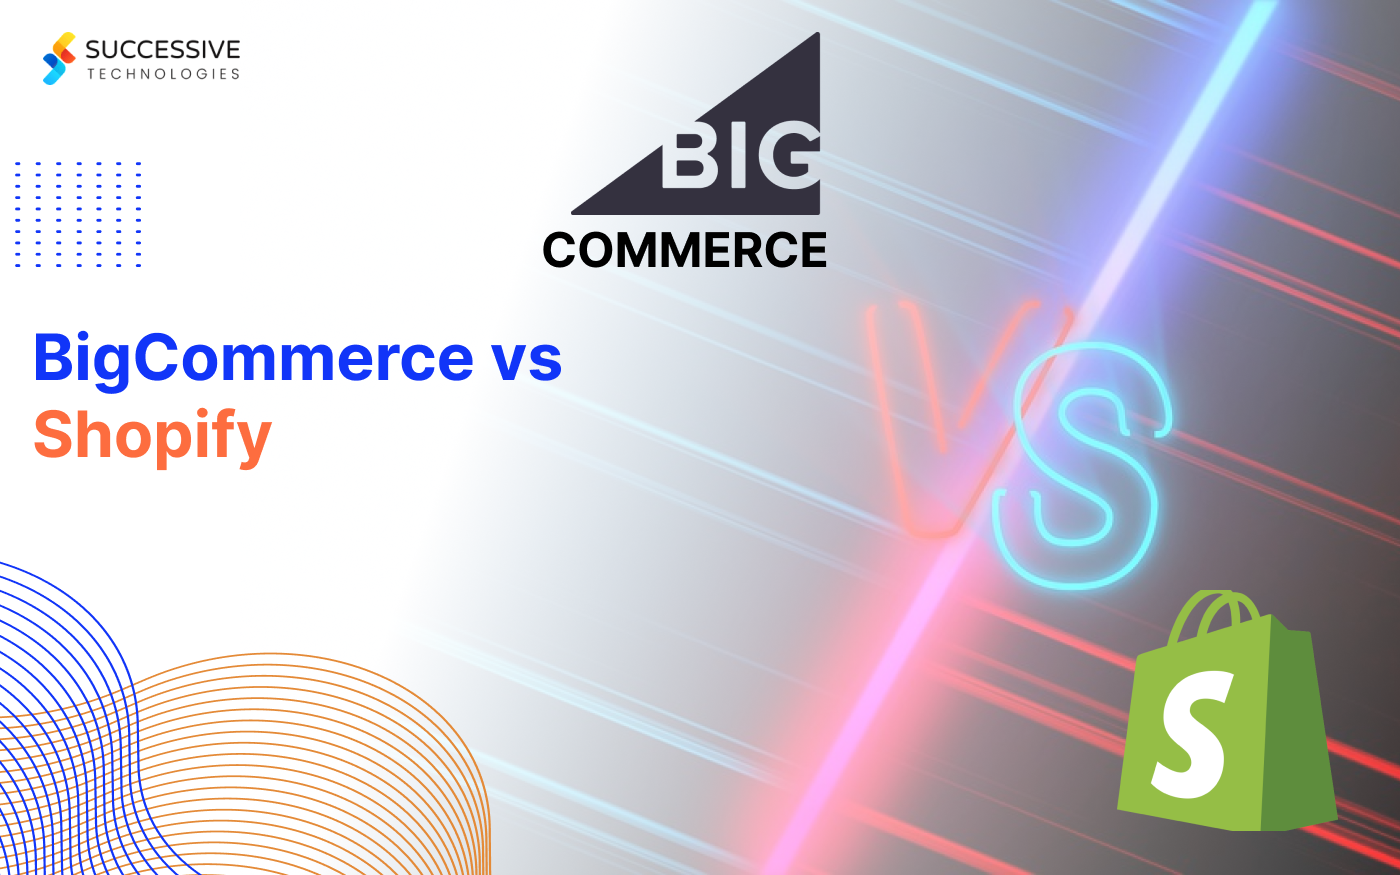 BigCommerce vs Shopify: Which Is Better for Your Business?